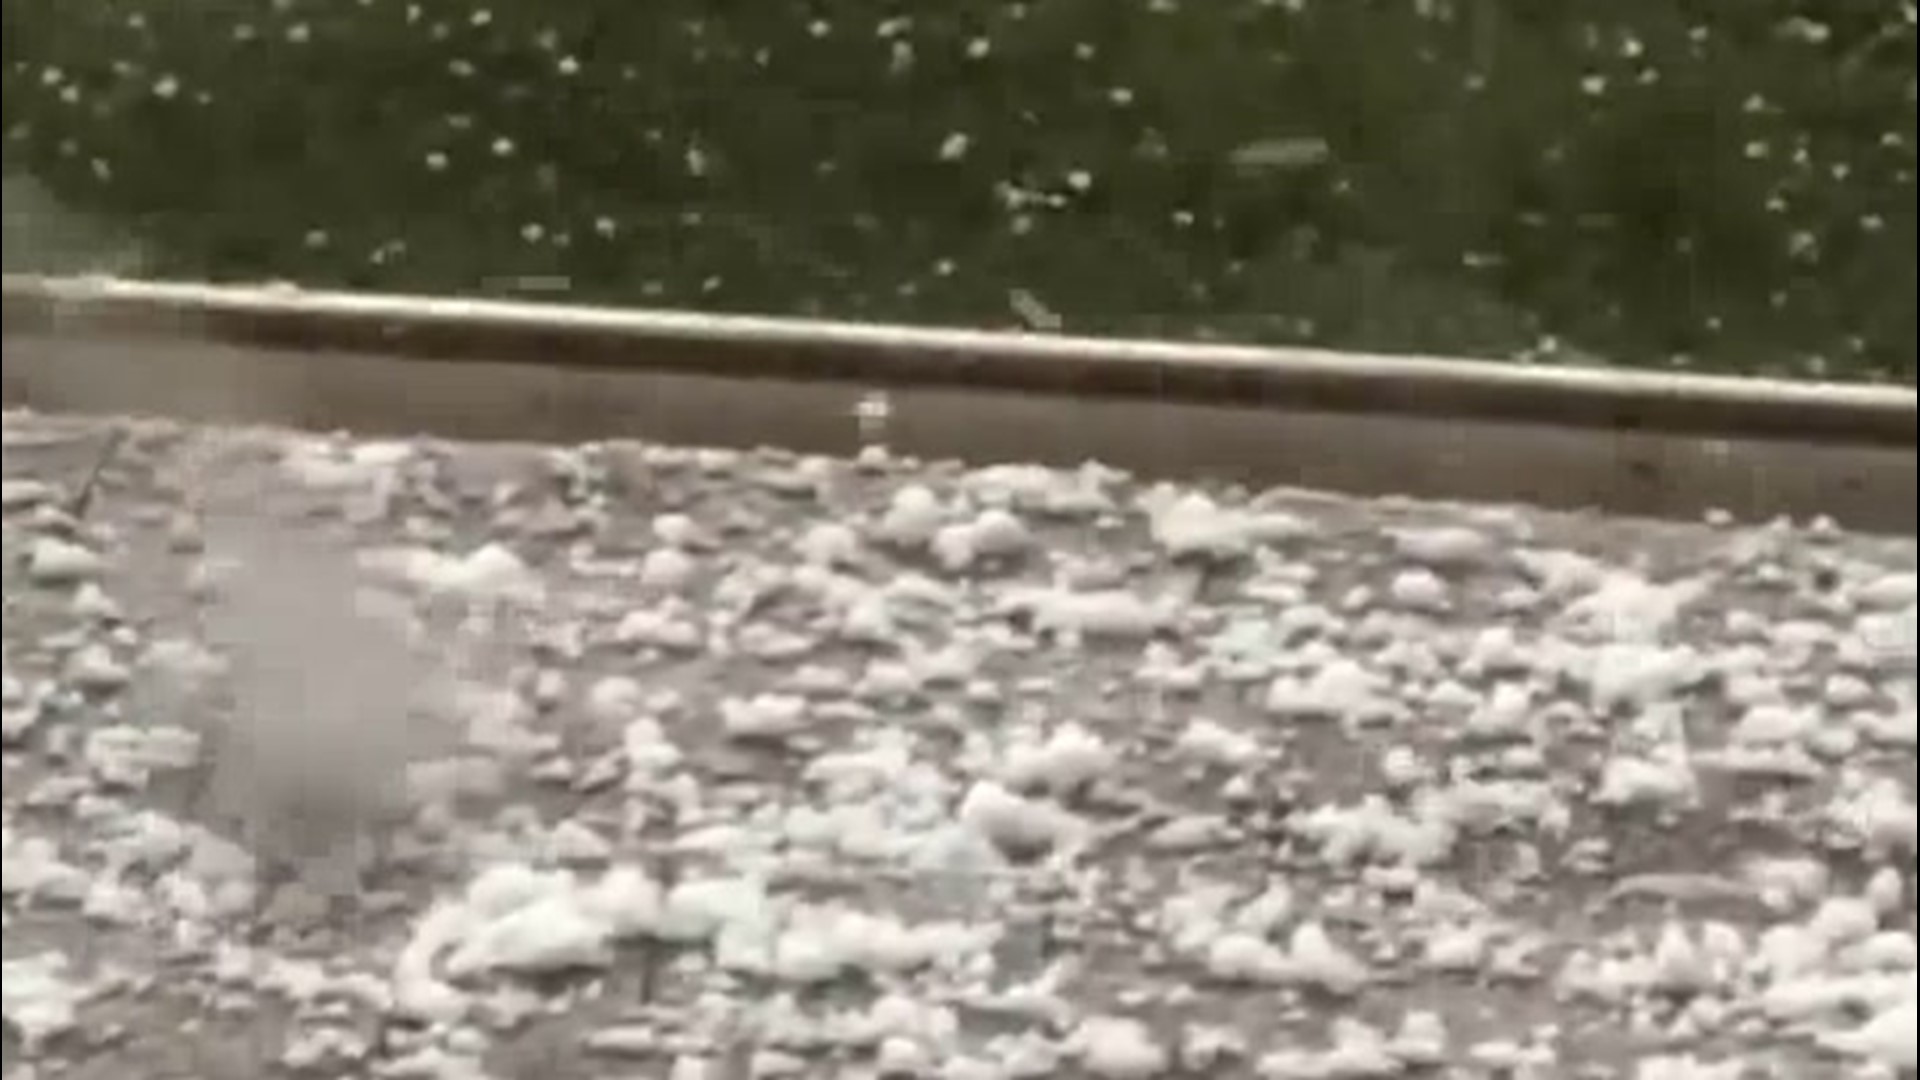 Severe thunderstorms moved through parts of Central and Eastern Montana on July 7. Up to golf-ball-size-hail was reported around the city of Bozeman, Montana.